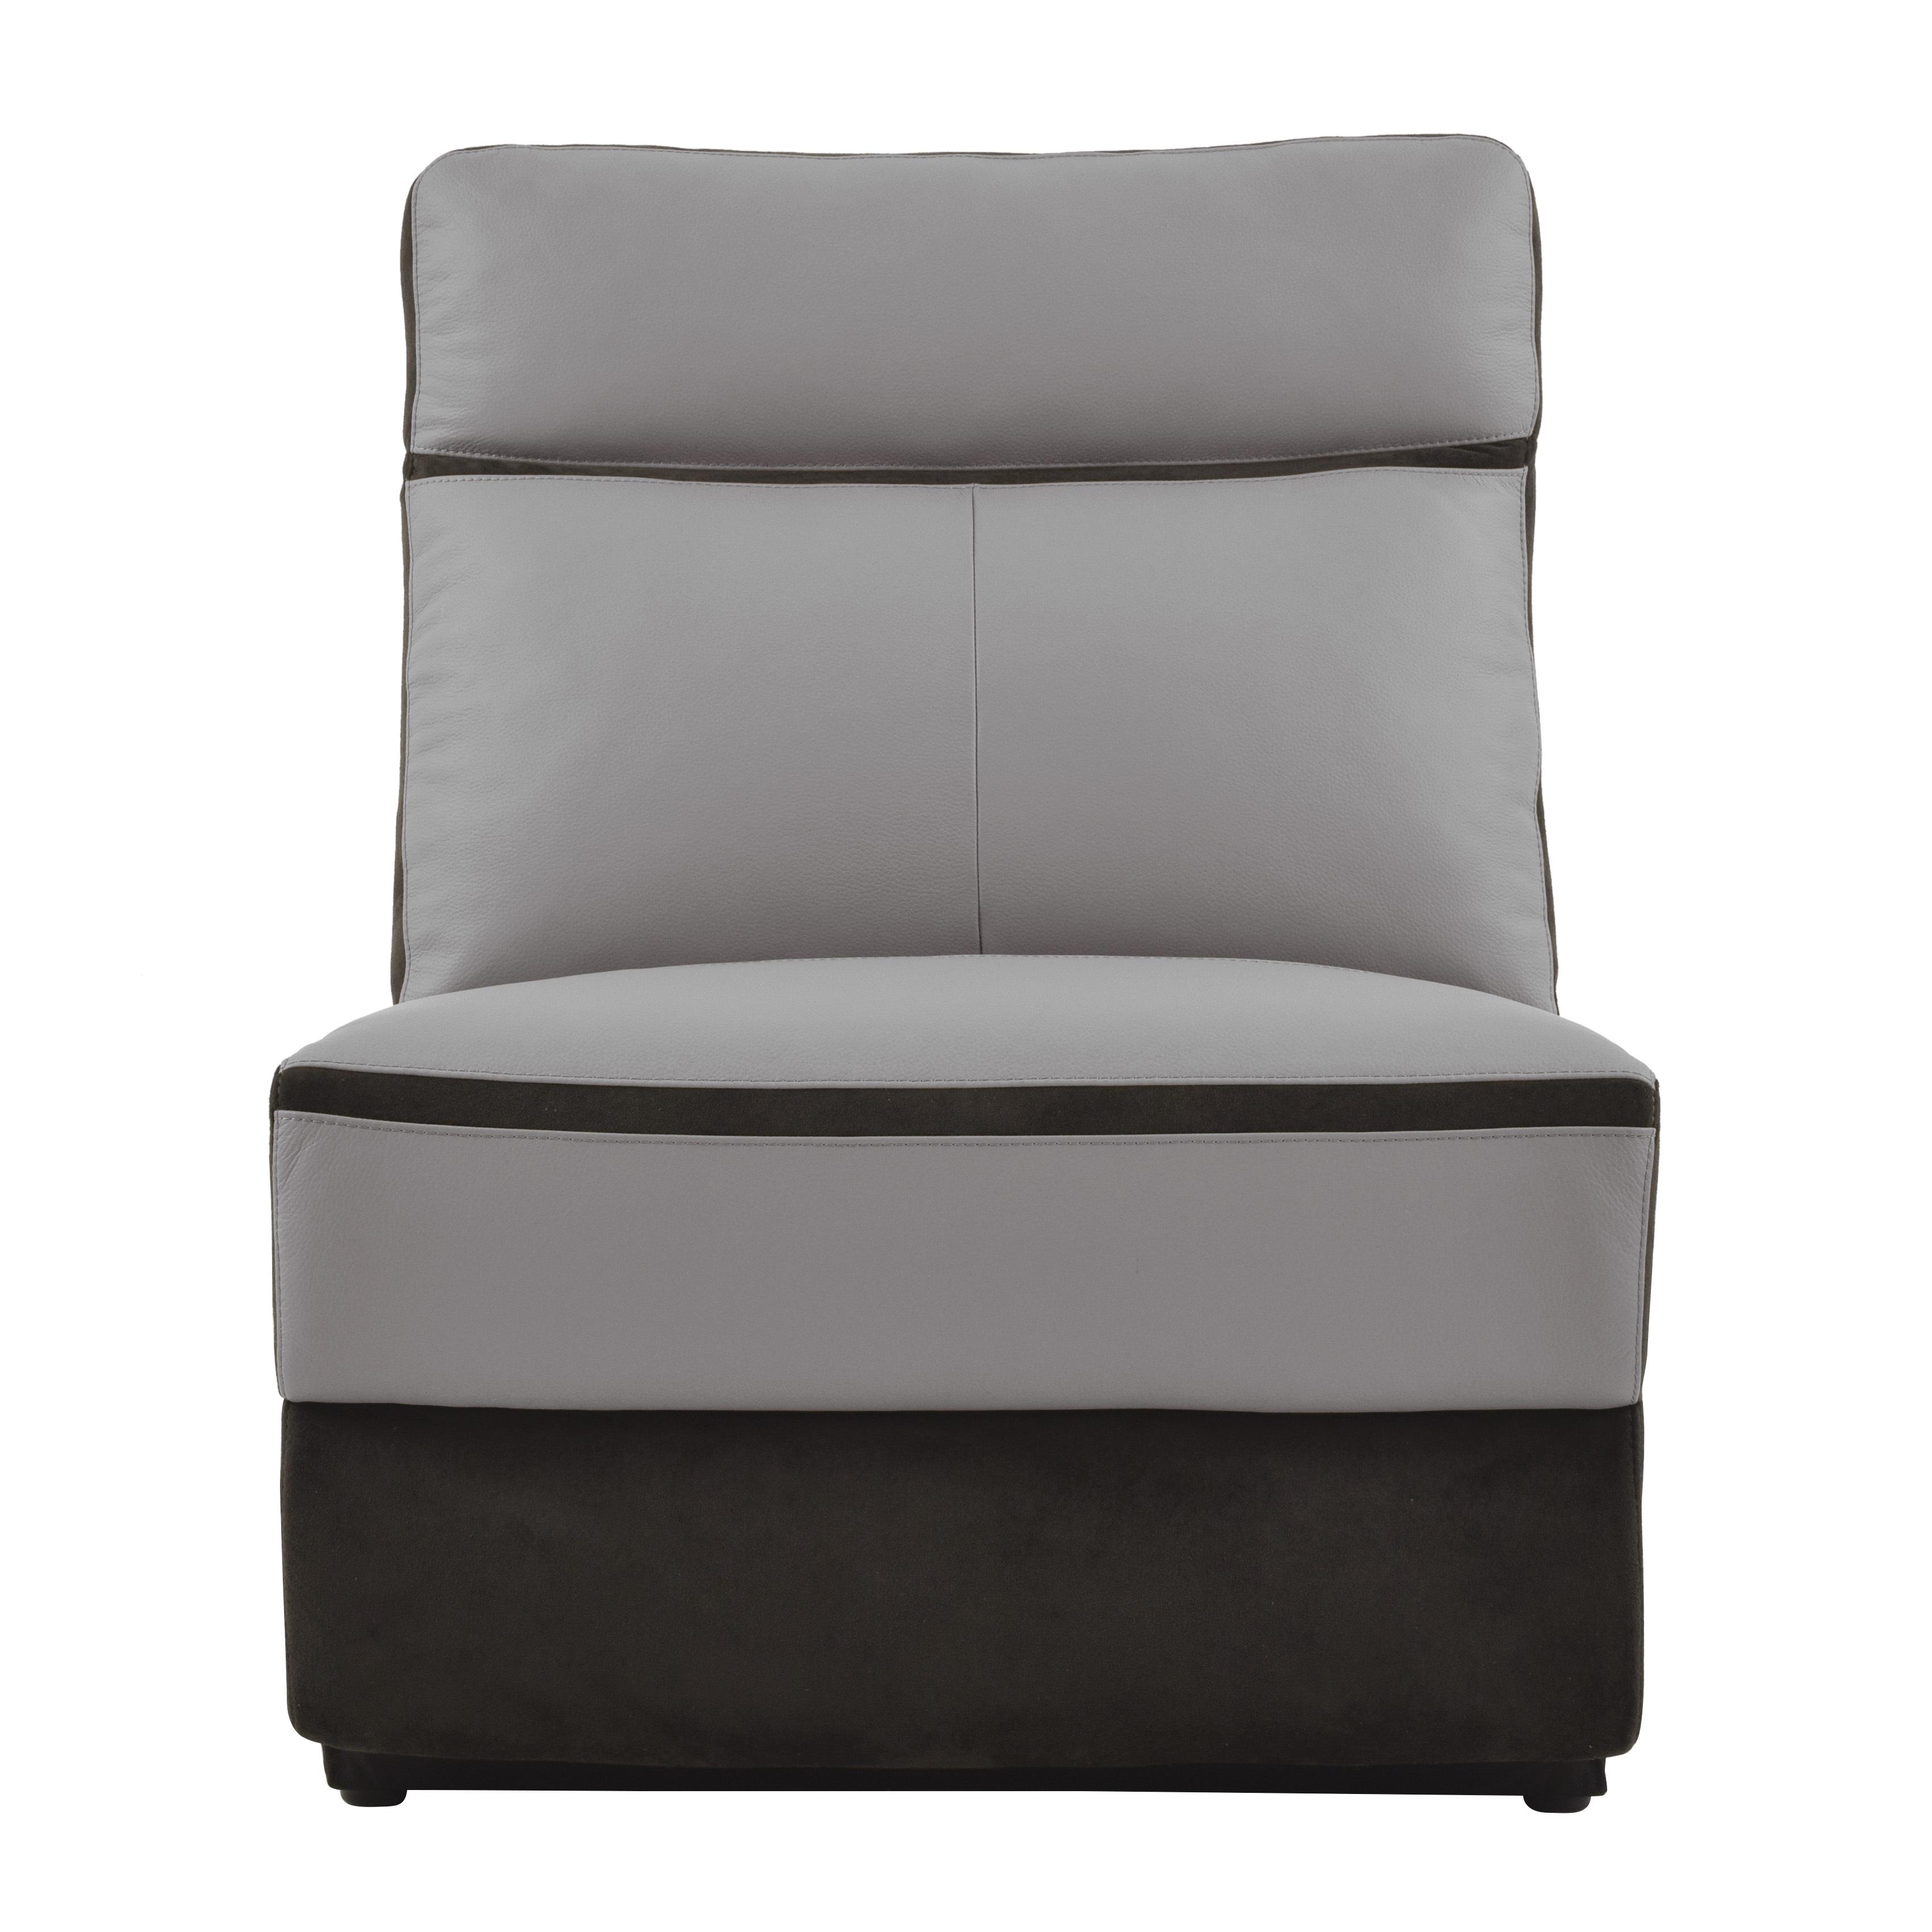 Modern Power Armless Reclining Chair 8318-ARPW Laertes 8318-ARPW in Charcoal Top grain leather